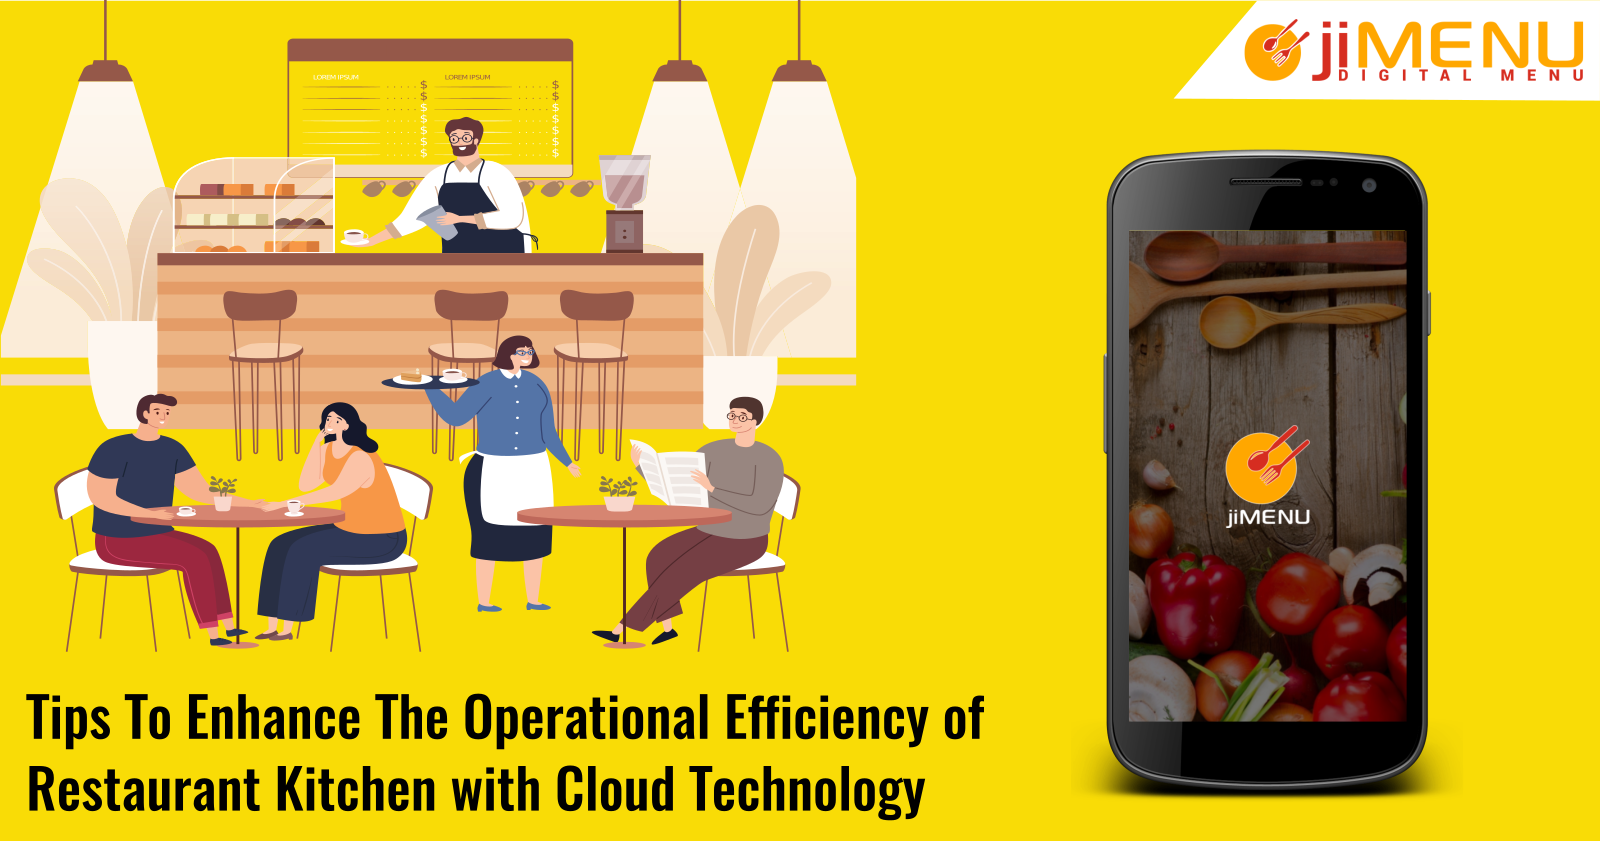 Tips To Enhance The Operational Efficiency of Restaurant Kitchen with Cloud Technology